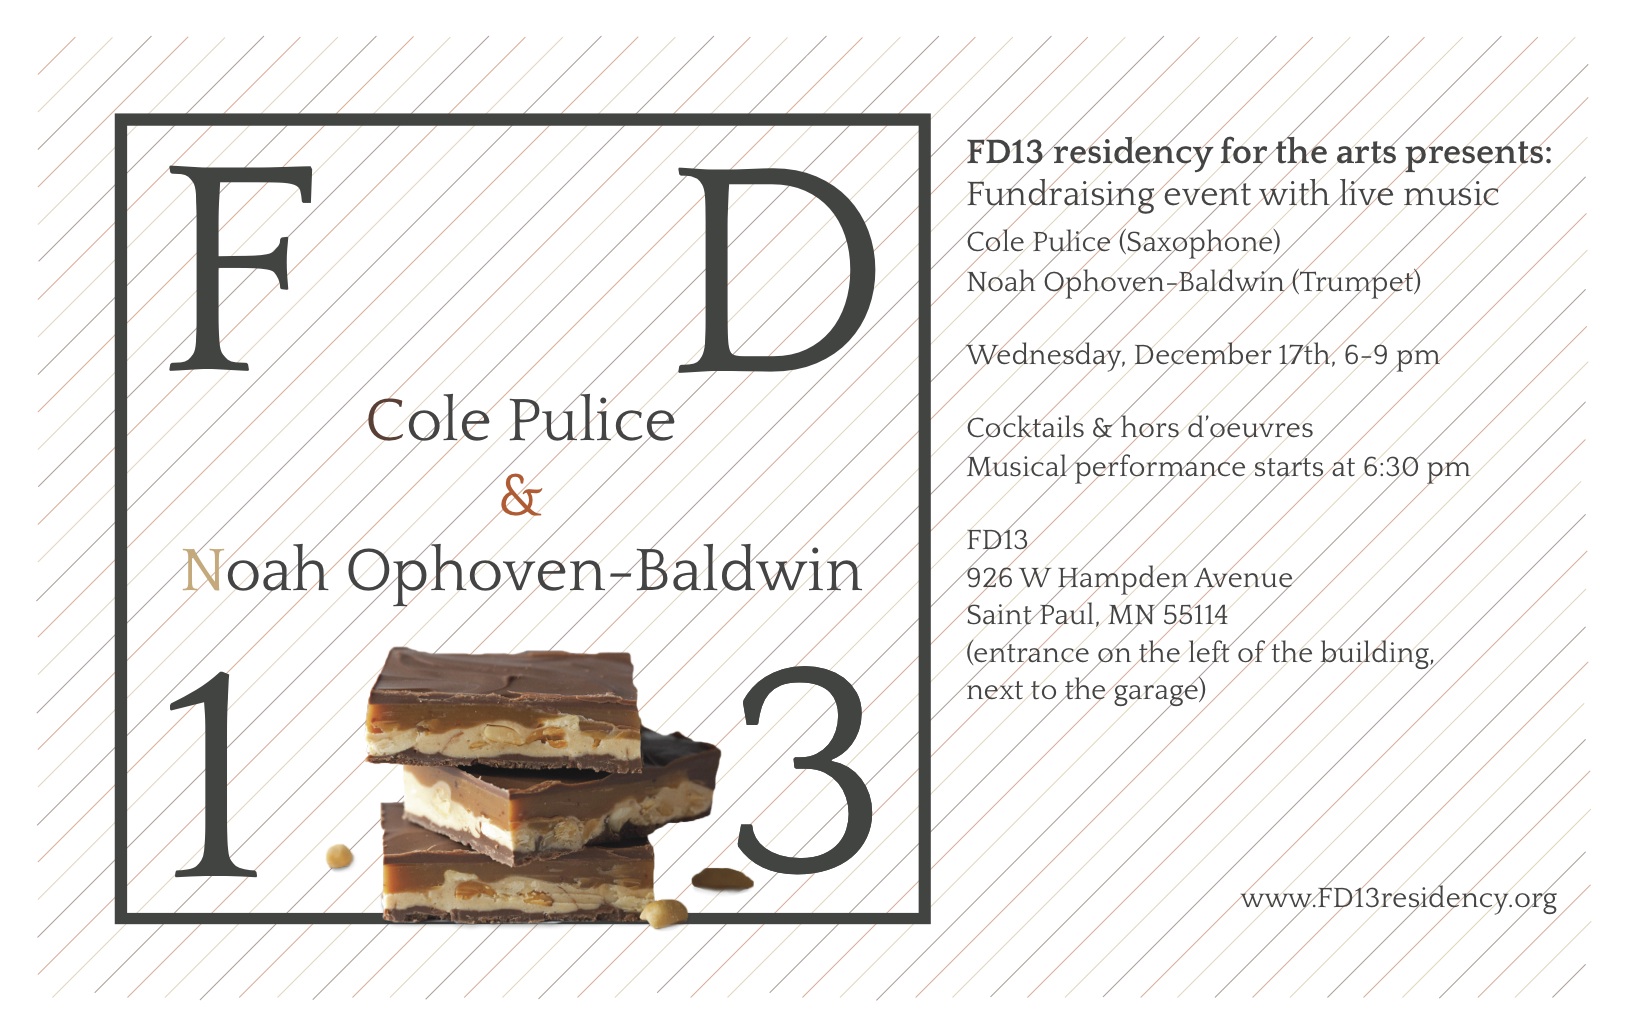 Save the date: FD13 fundraising event with live music